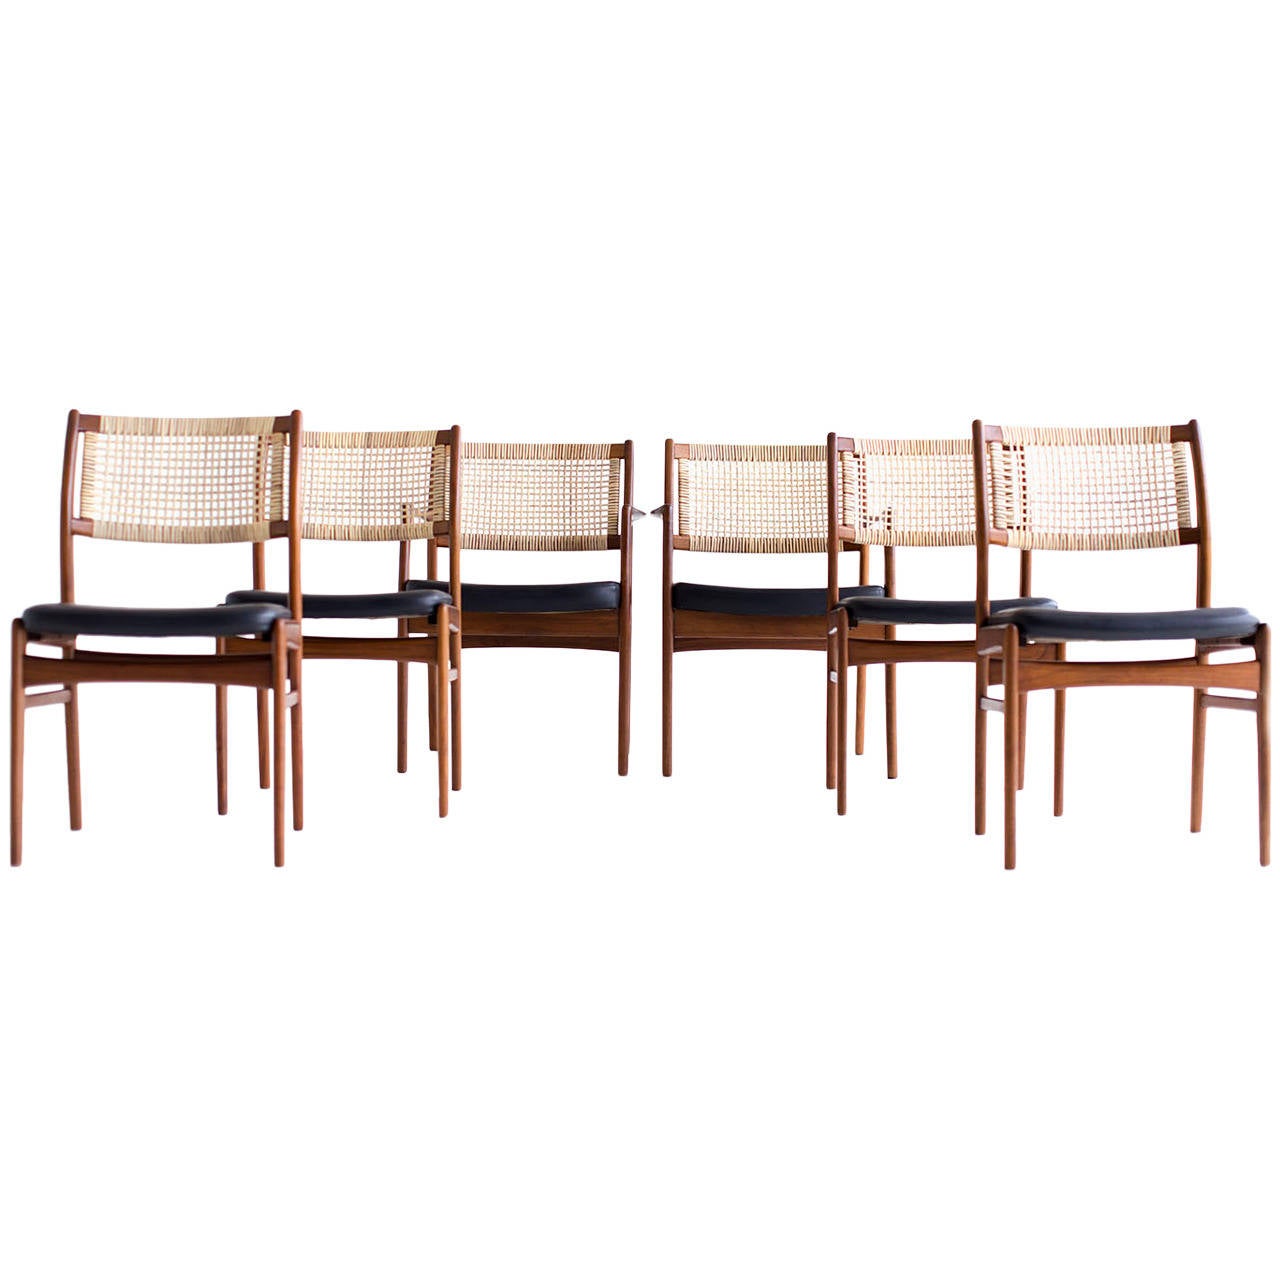 Sylve Stenquist Dining Chairs for DUX